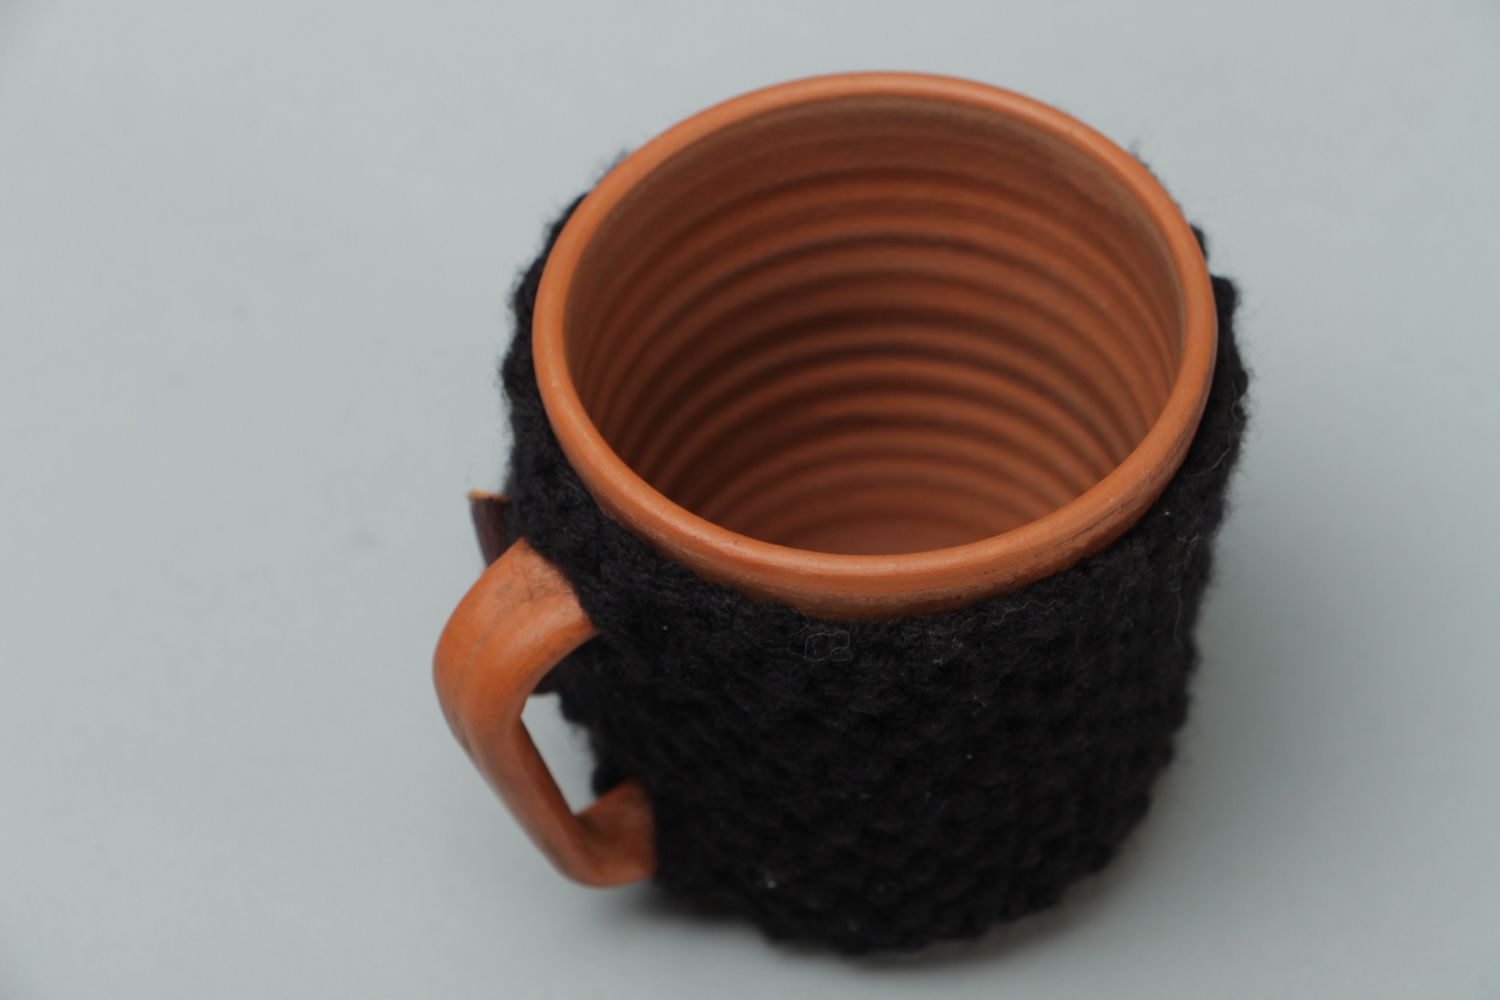 10 oz clay terracotta color cup with handle and black knitted cover photo 2